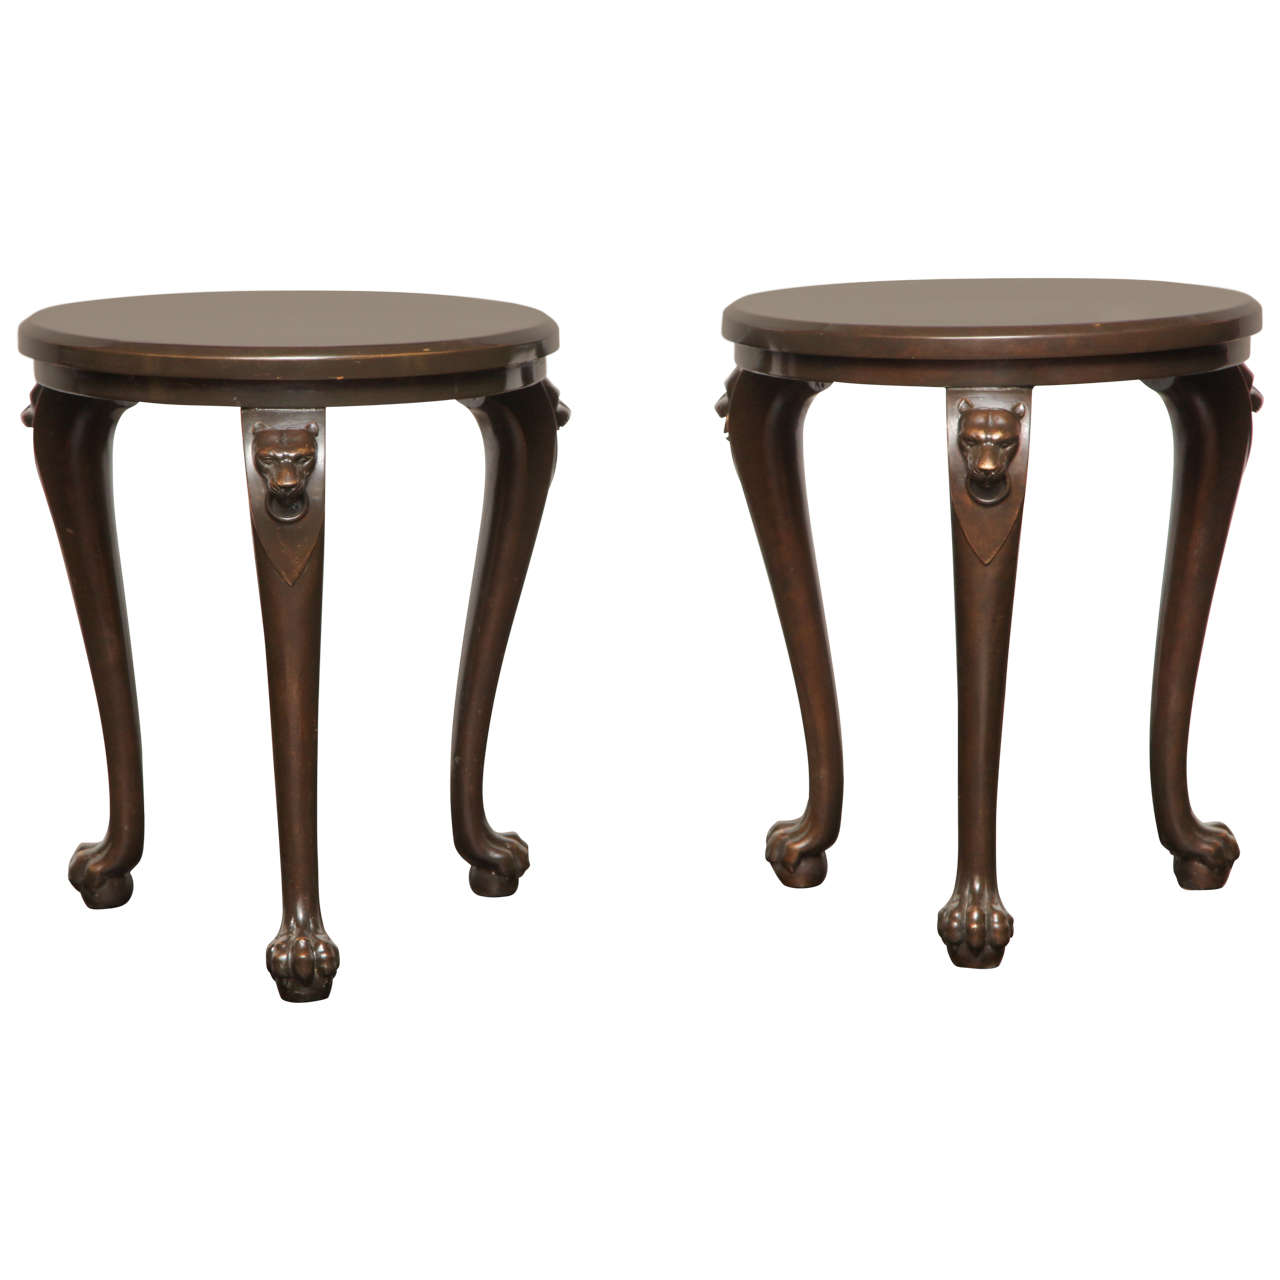 Pair of Late 19th Century Bronzed Copper Tables in the Pompeian Taste